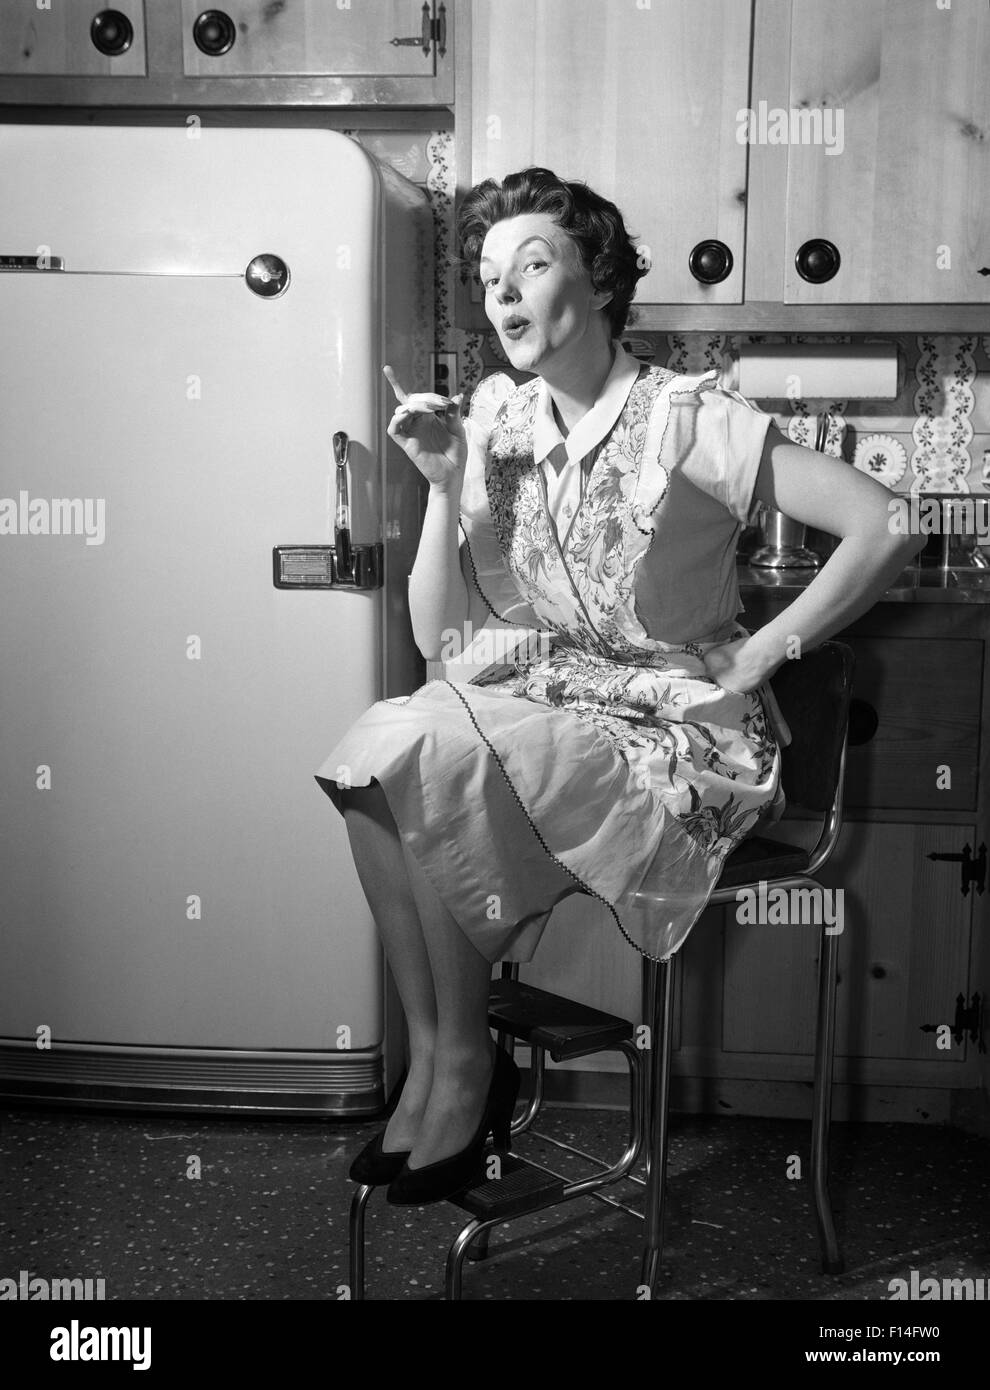 1950s HOUSEWIFE SITTING ON STOOL IN KITCHEN POINTING FINGER LOOKING AT CAMERA Stock Photo